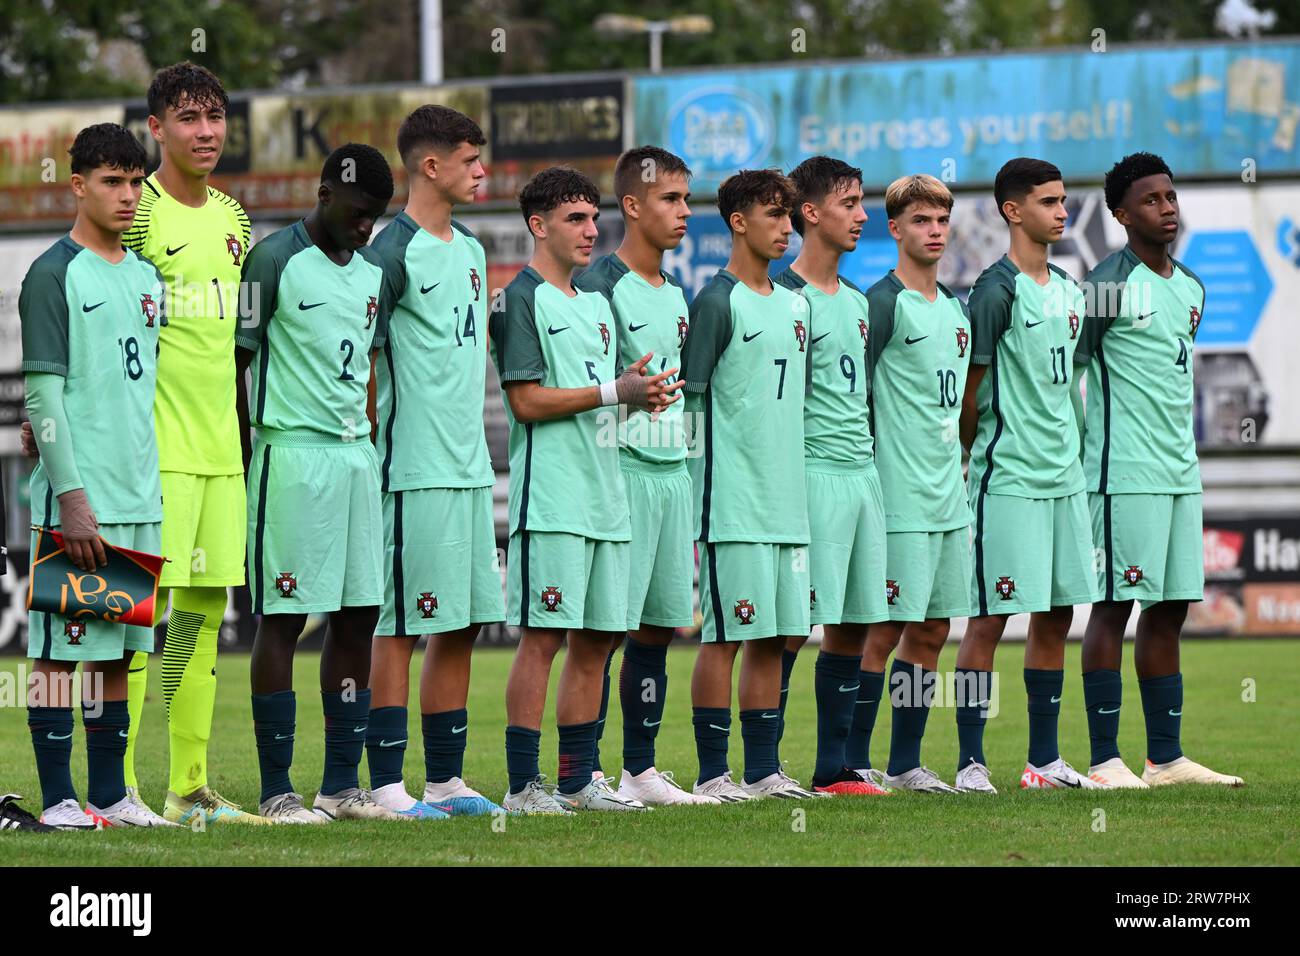 players of Portugal with Simao Soares (18) of Portugal, goalkeeper Leonardo Lopes (1) of Portugal, Daniel Banjaqui (2) of Portugal, Martim Antunes (14) of Portugal, Jose Domingues (5) of Portugal, Rafael Quintas (6) of Portugal, Joao Aragao (7) of Portugal, Tomas Soares (9) of Portugal, Joao Abreu (10) of Portugal, Ricardo Pereira (11) of Portugal and Mauro Furtado (4) of Portugal pictured during the national anthems ahead of a friendly soccer game between the national under 16 teams of Portugal and Belgium on Sunday 17 September 2023 in Sint-Niklaas, Belgium . PHOTO SPORTPIX | David Catry Stock Photo